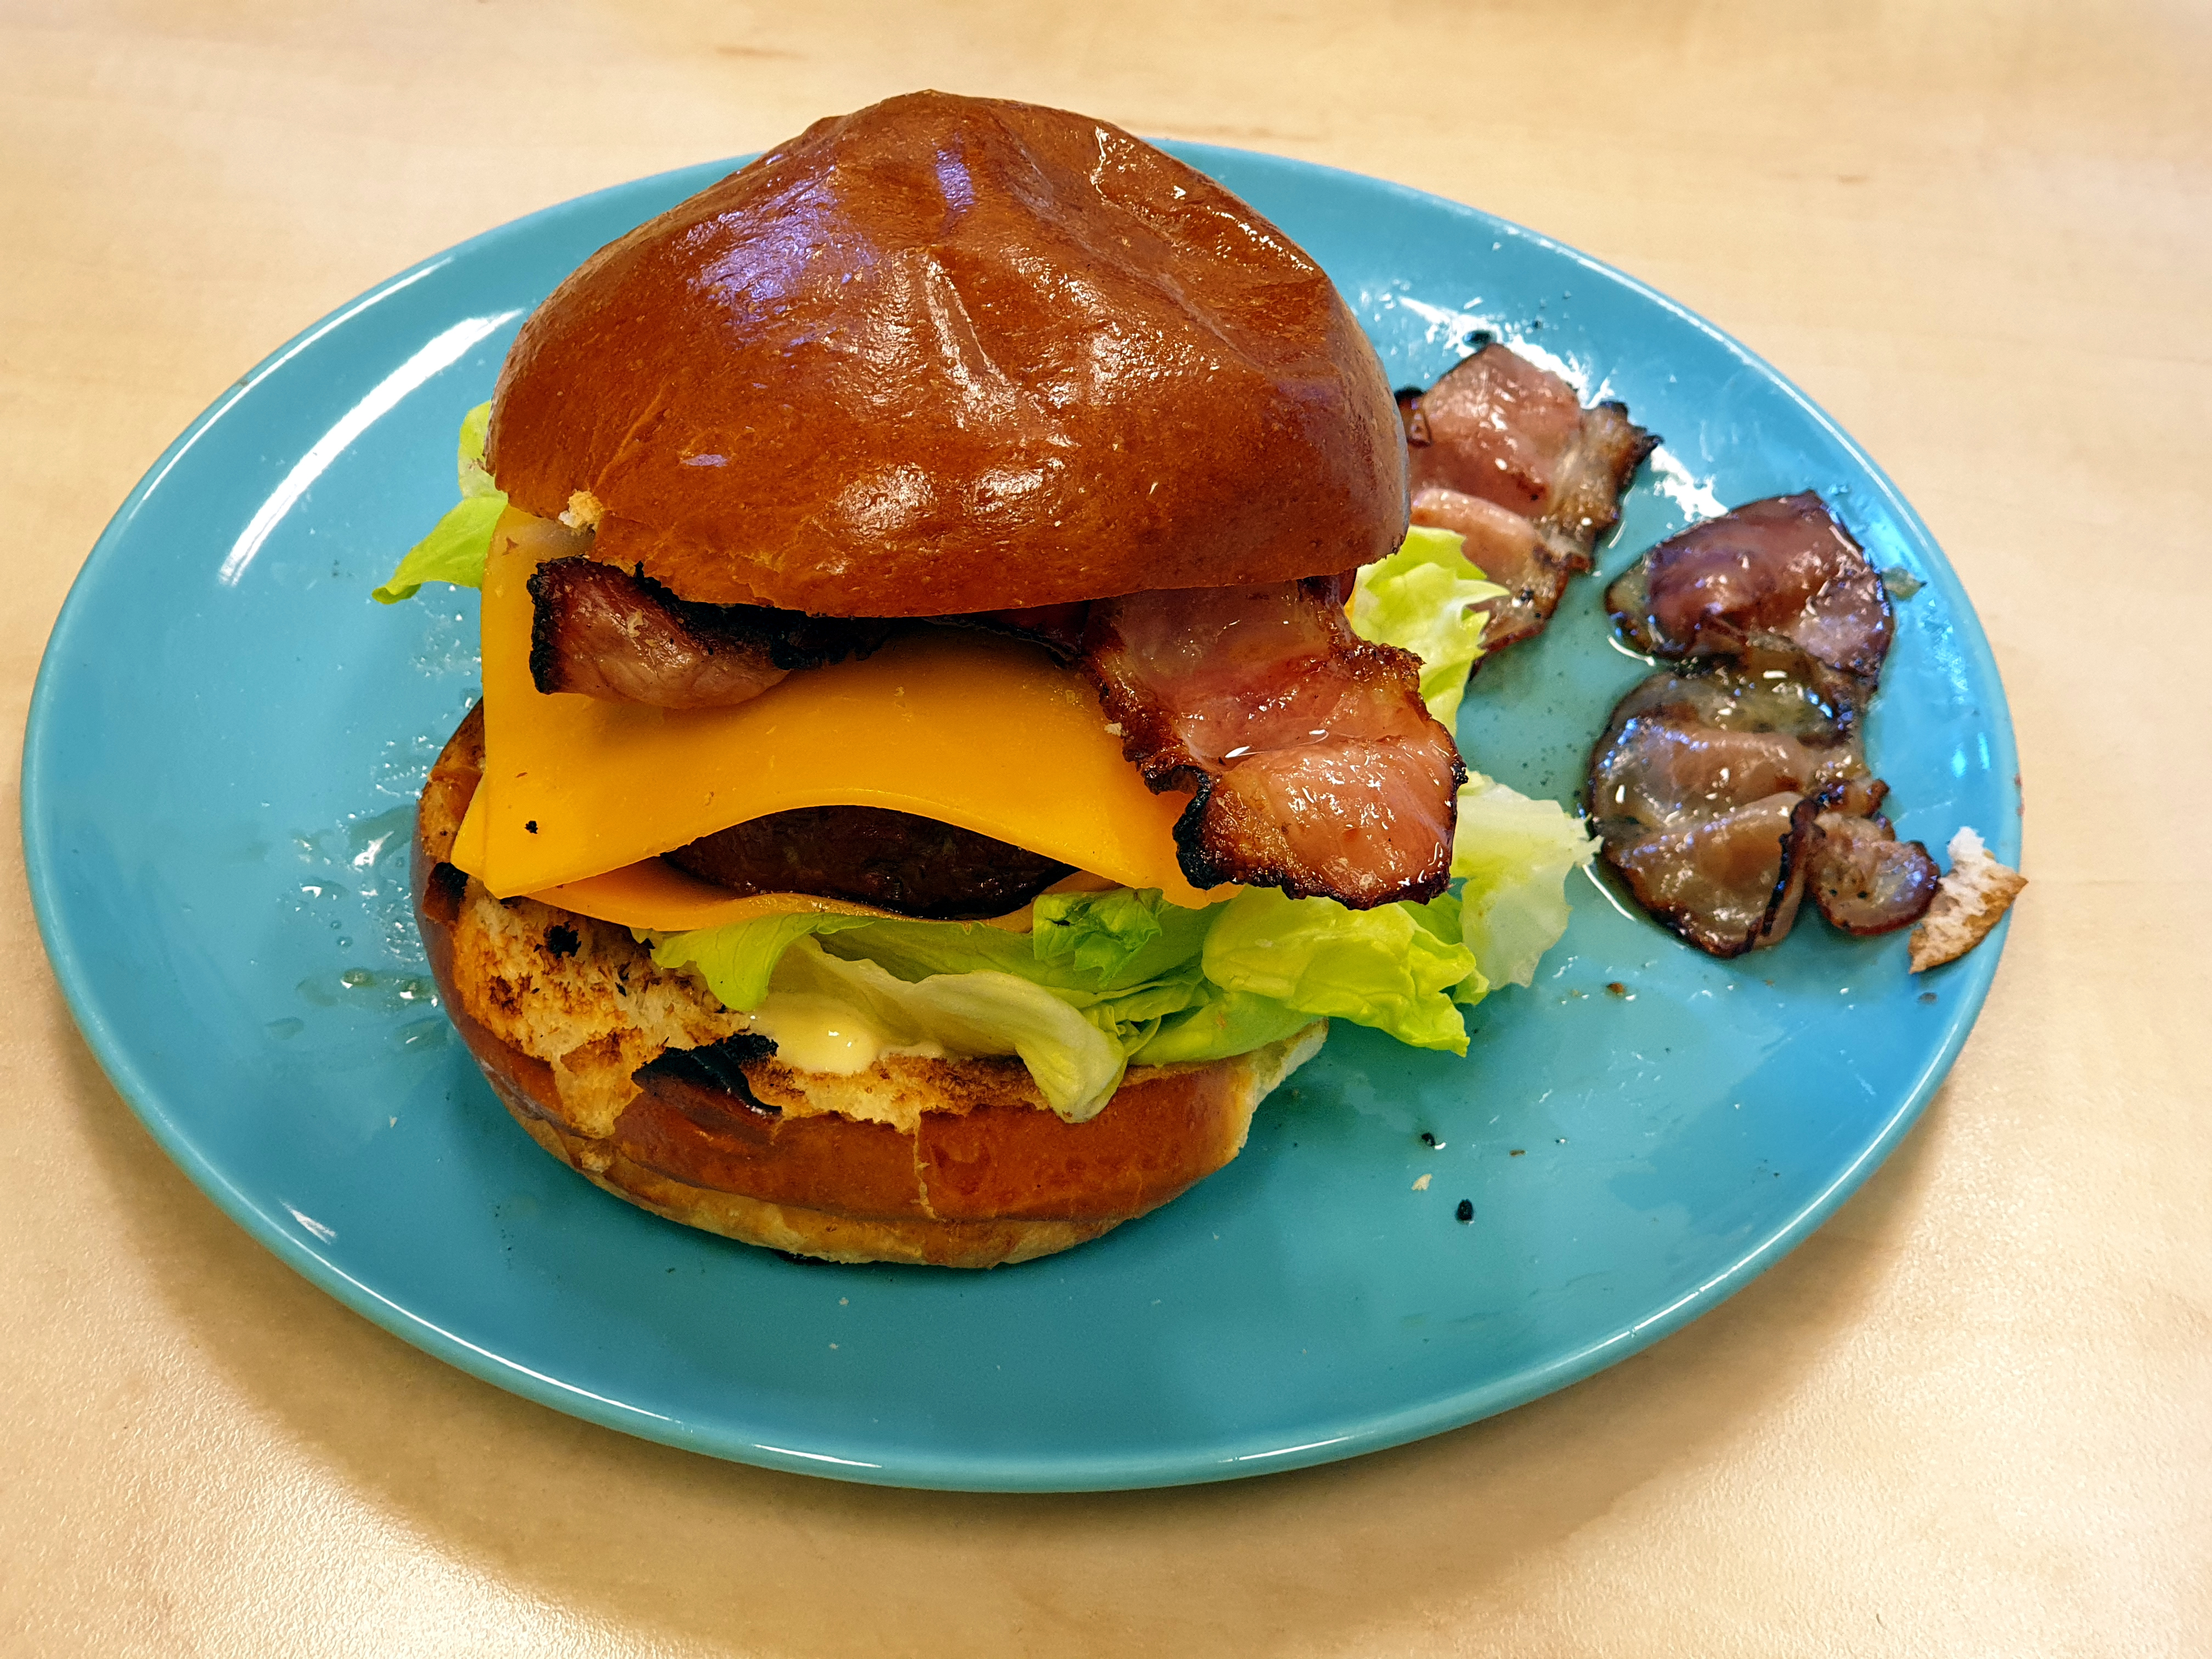 Food_burger_004_homemade_with_cheddar_and_bacon.jpg